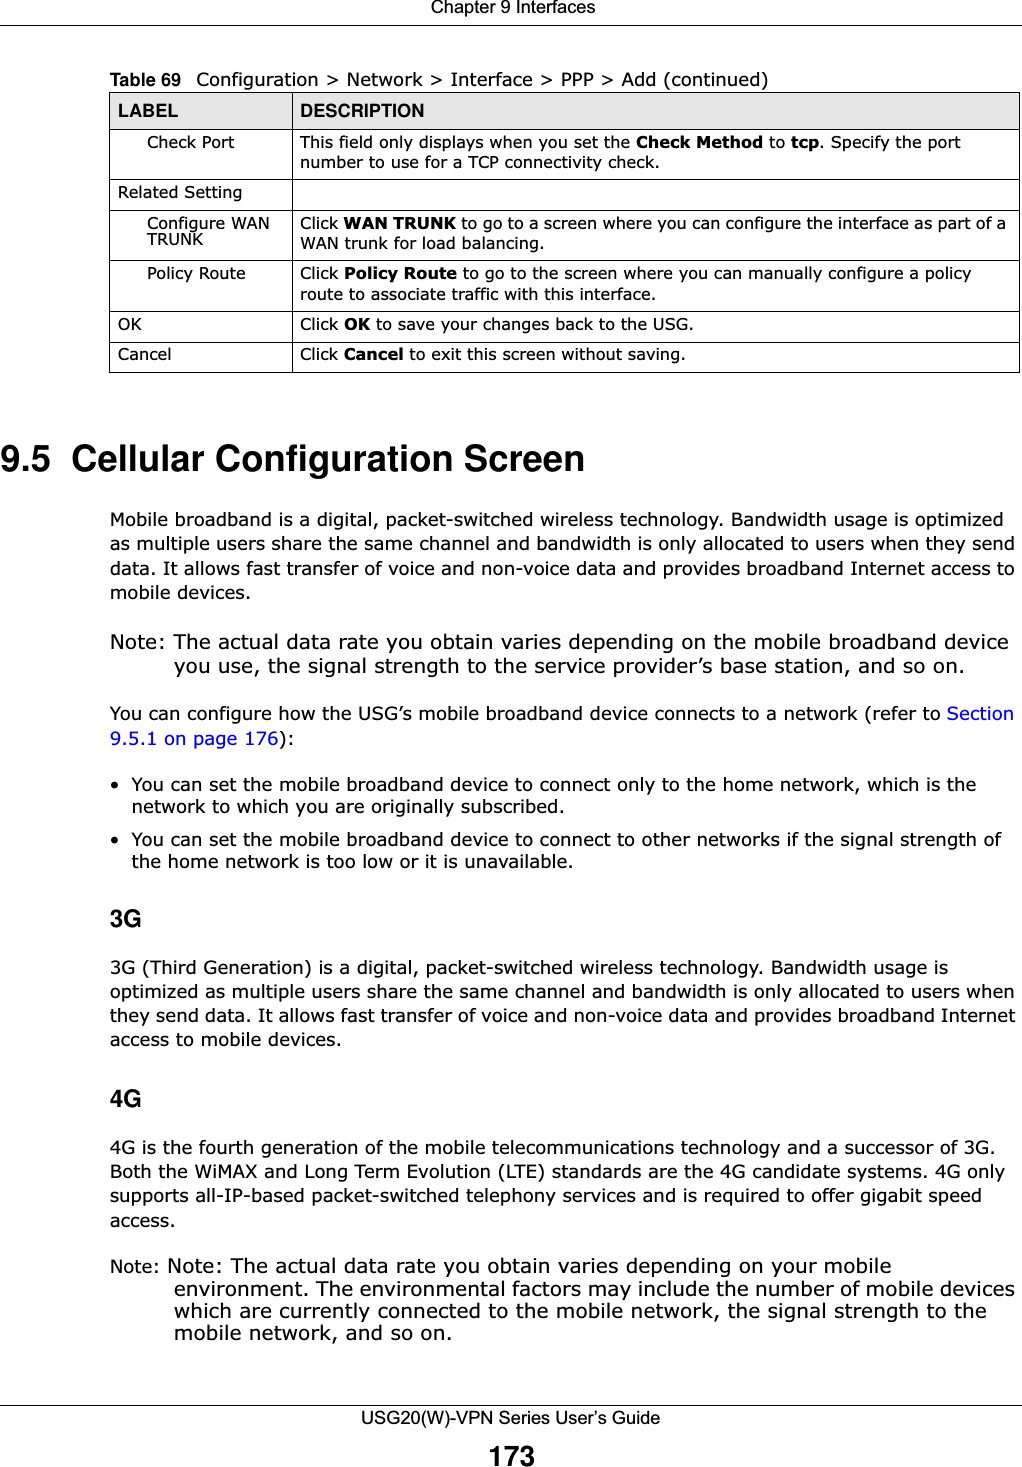  Chapter 9 InterfacesUSG20(W)-VPN Series User’s Guide1739.5  Cellular Configuration ScreenMobile broadband is a digital, packet-switched wireless technology. Bandwidth usage is optimized as multiple users share the same channel and bandwidth is only allocated to users when they send data. It allows fast transfer of voice and non-voice data and provides broadband Internet access to mobile devices. Note: The actual data rate you obtain varies depending on the mobile broadband device you use, the signal strength to the service provider’s base station, and so on.You can configure how the USG’s mobile broadband device connects to a network (refer to Section 9.5.1 on page 176): • You can set the mobile broadband device to connect only to the home network, which is the network to which you are originally subscribed. • You can set the mobile broadband device to connect to other networks if the signal strength of the home network is too low or it is unavailable. 3G3G (Third Generation) is a digital, packet-switched wireless technology. Bandwidth usage is optimized as multiple users share the same channel and bandwidth is only allocated to users when they send data. It allows fast transfer of voice and non-voice data and provides broadband Internet access to mobile devices.4G4G is the fourth generation of the mobile telecommunications technology and a successor of 3G. Both the WiMAX and Long Term Evolution (LTE) standards are the 4G candidate systems. 4G only supports all-IP-based packet-switched telephony services and is required to offer gigabit speed access.Note: Note: The actual data rate you obtain varies depending on your mobile environment. The environmental factors may include the number of mobile devices which are currently connected to the mobile network, the signal strength to the mobile network, and so on.Check Port This field only displays when you set the Check Method to tcp. Specify the port number to use for a TCP connectivity check.Related SettingConfigure WAN TRUNK  Click WAN TRUNK to go to a screen where you can configure the interface as part of a WAN trunk for load balancing.Policy Route Click Policy Route to go to the screen where you can manually configure a policy route to associate traffic with this interface.OK Click OK to save your changes back to the USG.Cancel Click Cancel to exit this screen without saving.Table 69   Configuration &gt; Network &gt; Interface &gt; PPP &gt; Add (continued)LABEL DESCRIPTION